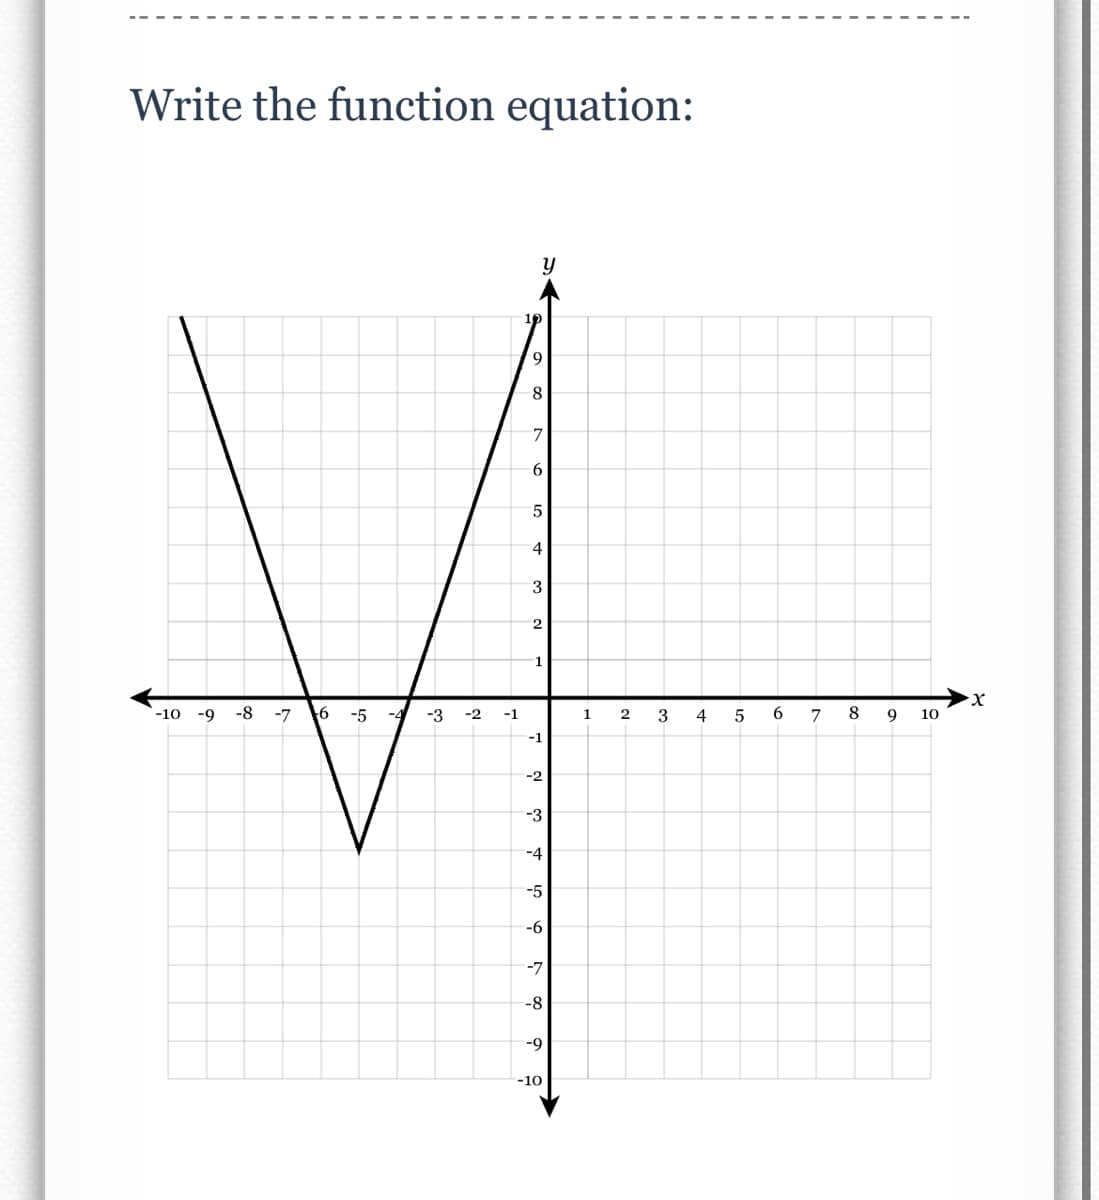 Write the function equation:
19
9.
5.
4
3
-10
-9
-8
-7
6
-5
-3
-2
-1
2
6.
7
8
9
10
-1
-2
-3
-4
-5
-6
-7
-8
-9
-10
